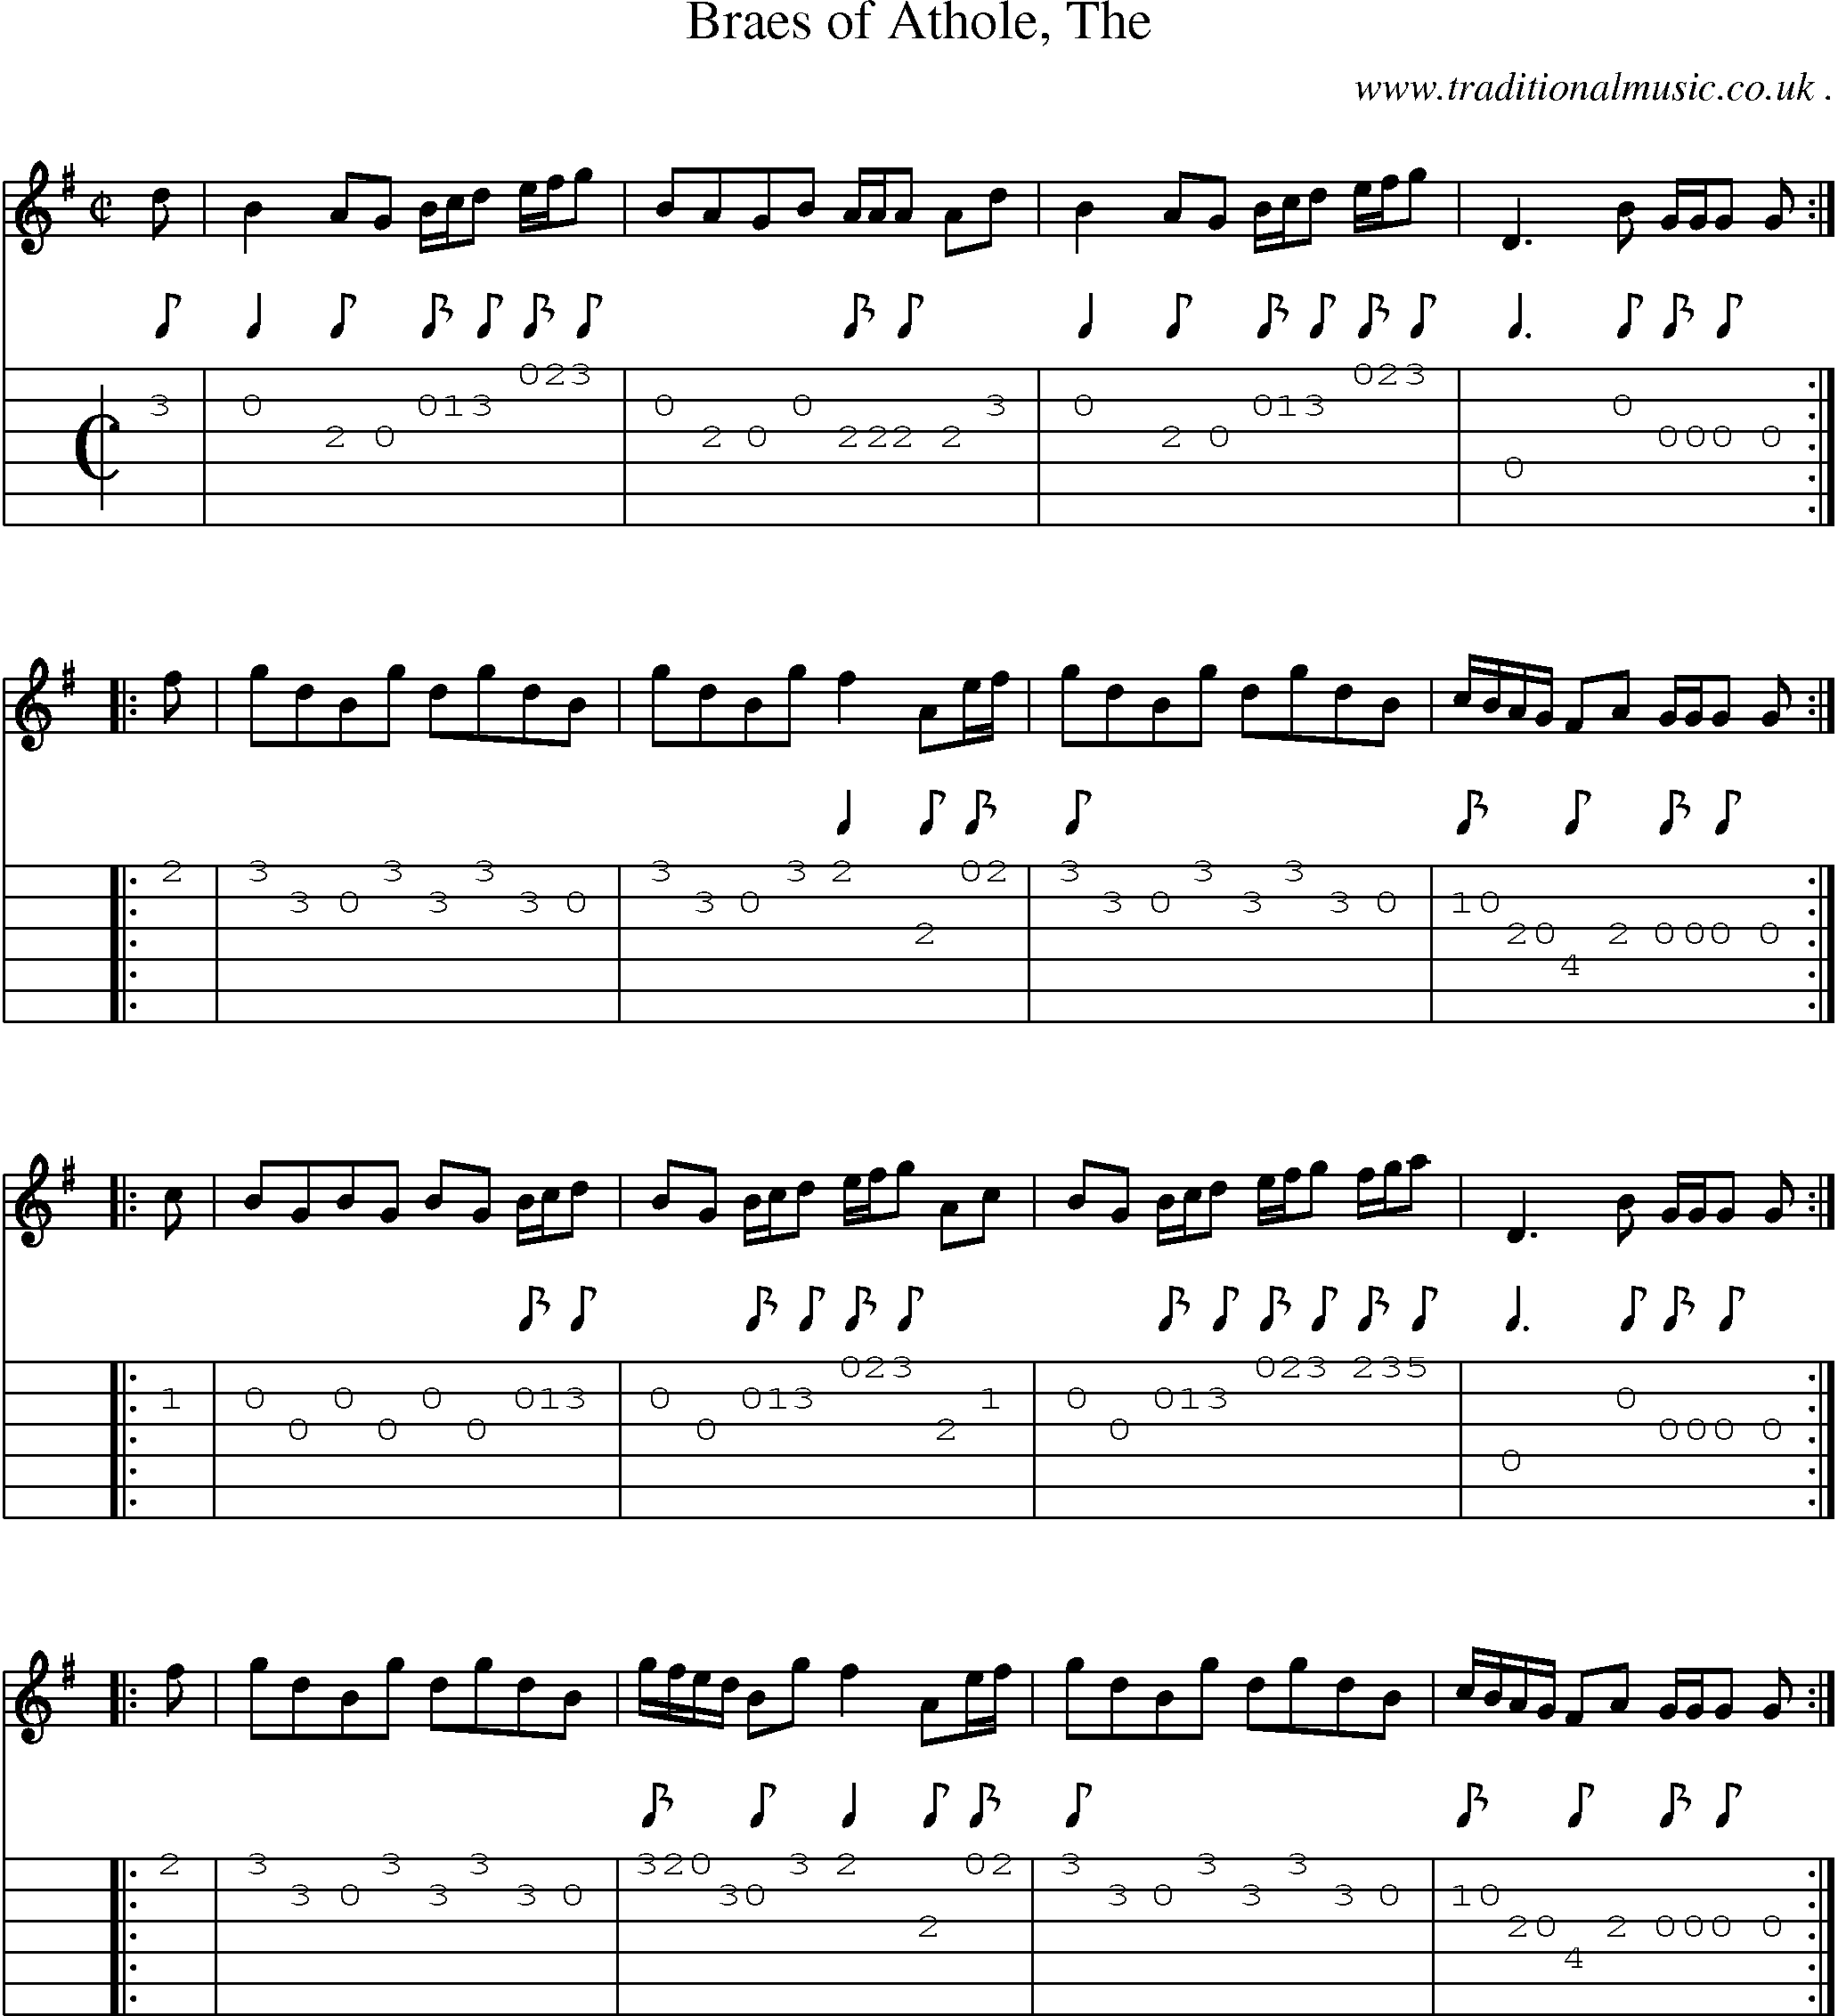 Sheet-music  score, Chords and Guitar Tabs for Braes Of Athole The